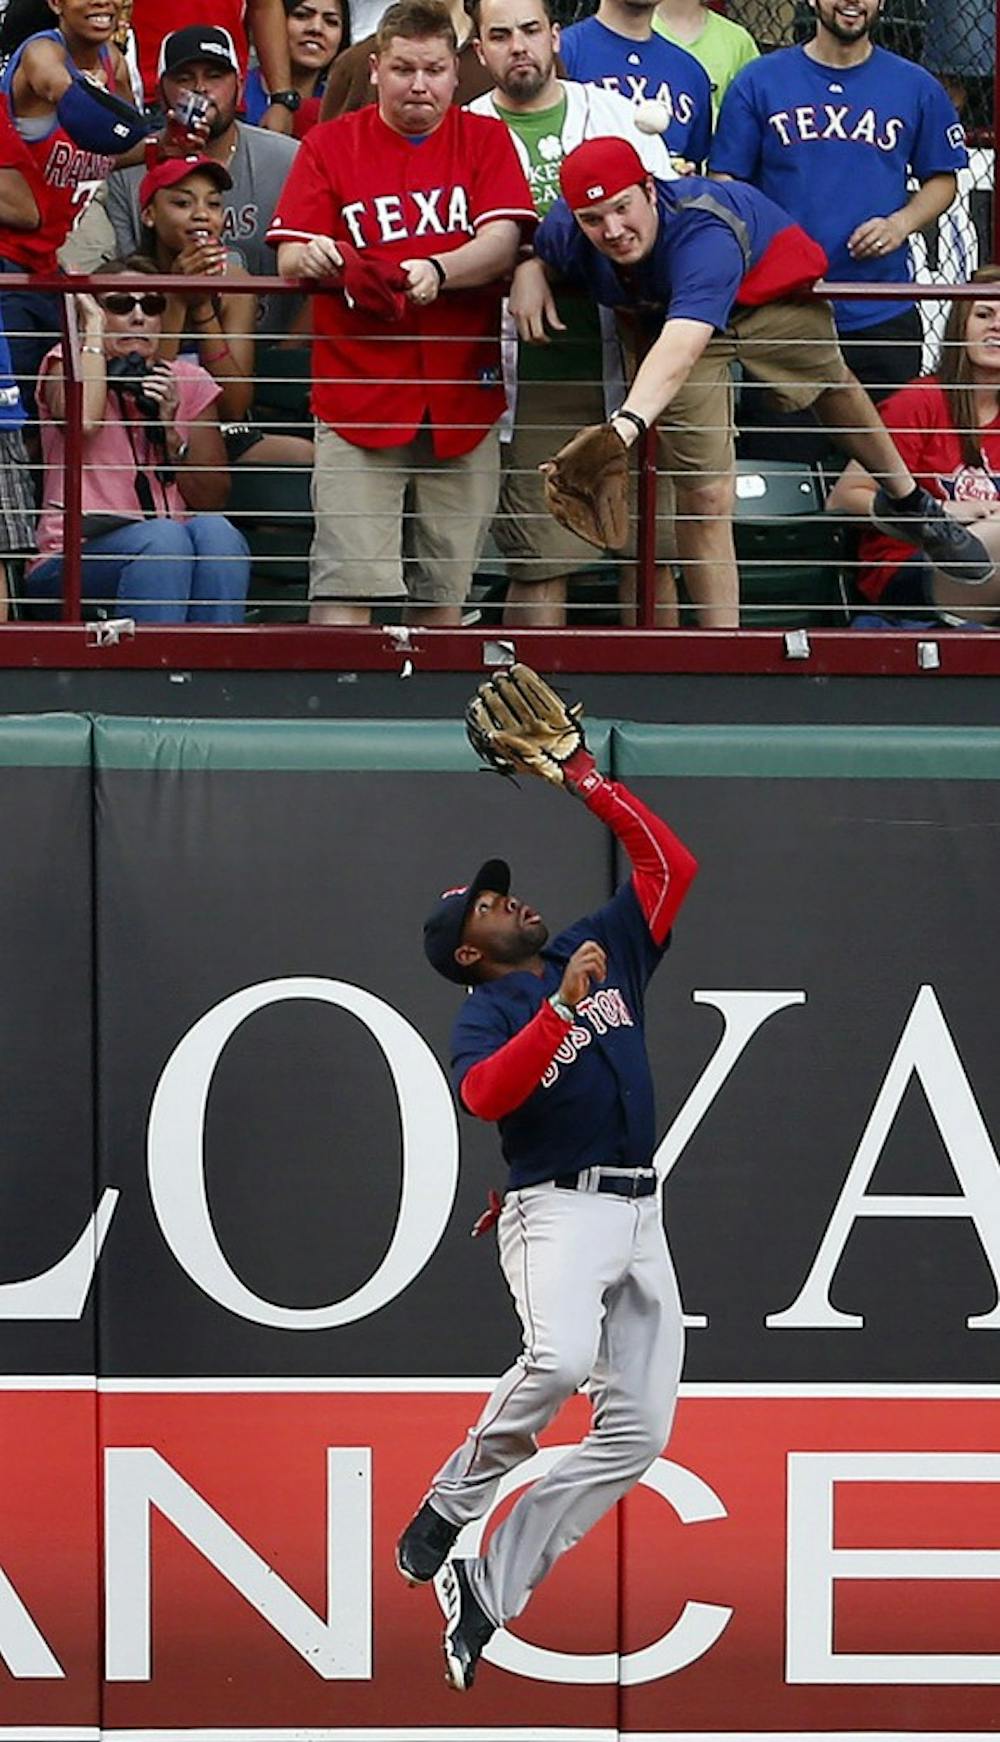 Center fielder Jackie Bradley Jr. of the Boston Red Sox makes a play on a ball hit by Prince Fielder of the Texas Rangers as a fan tries to make his own catch  on Friday, May 9, 2014, in Arlington, Texas. (Ron Jenkins/Fort Worth Star-Telegram/MCT)